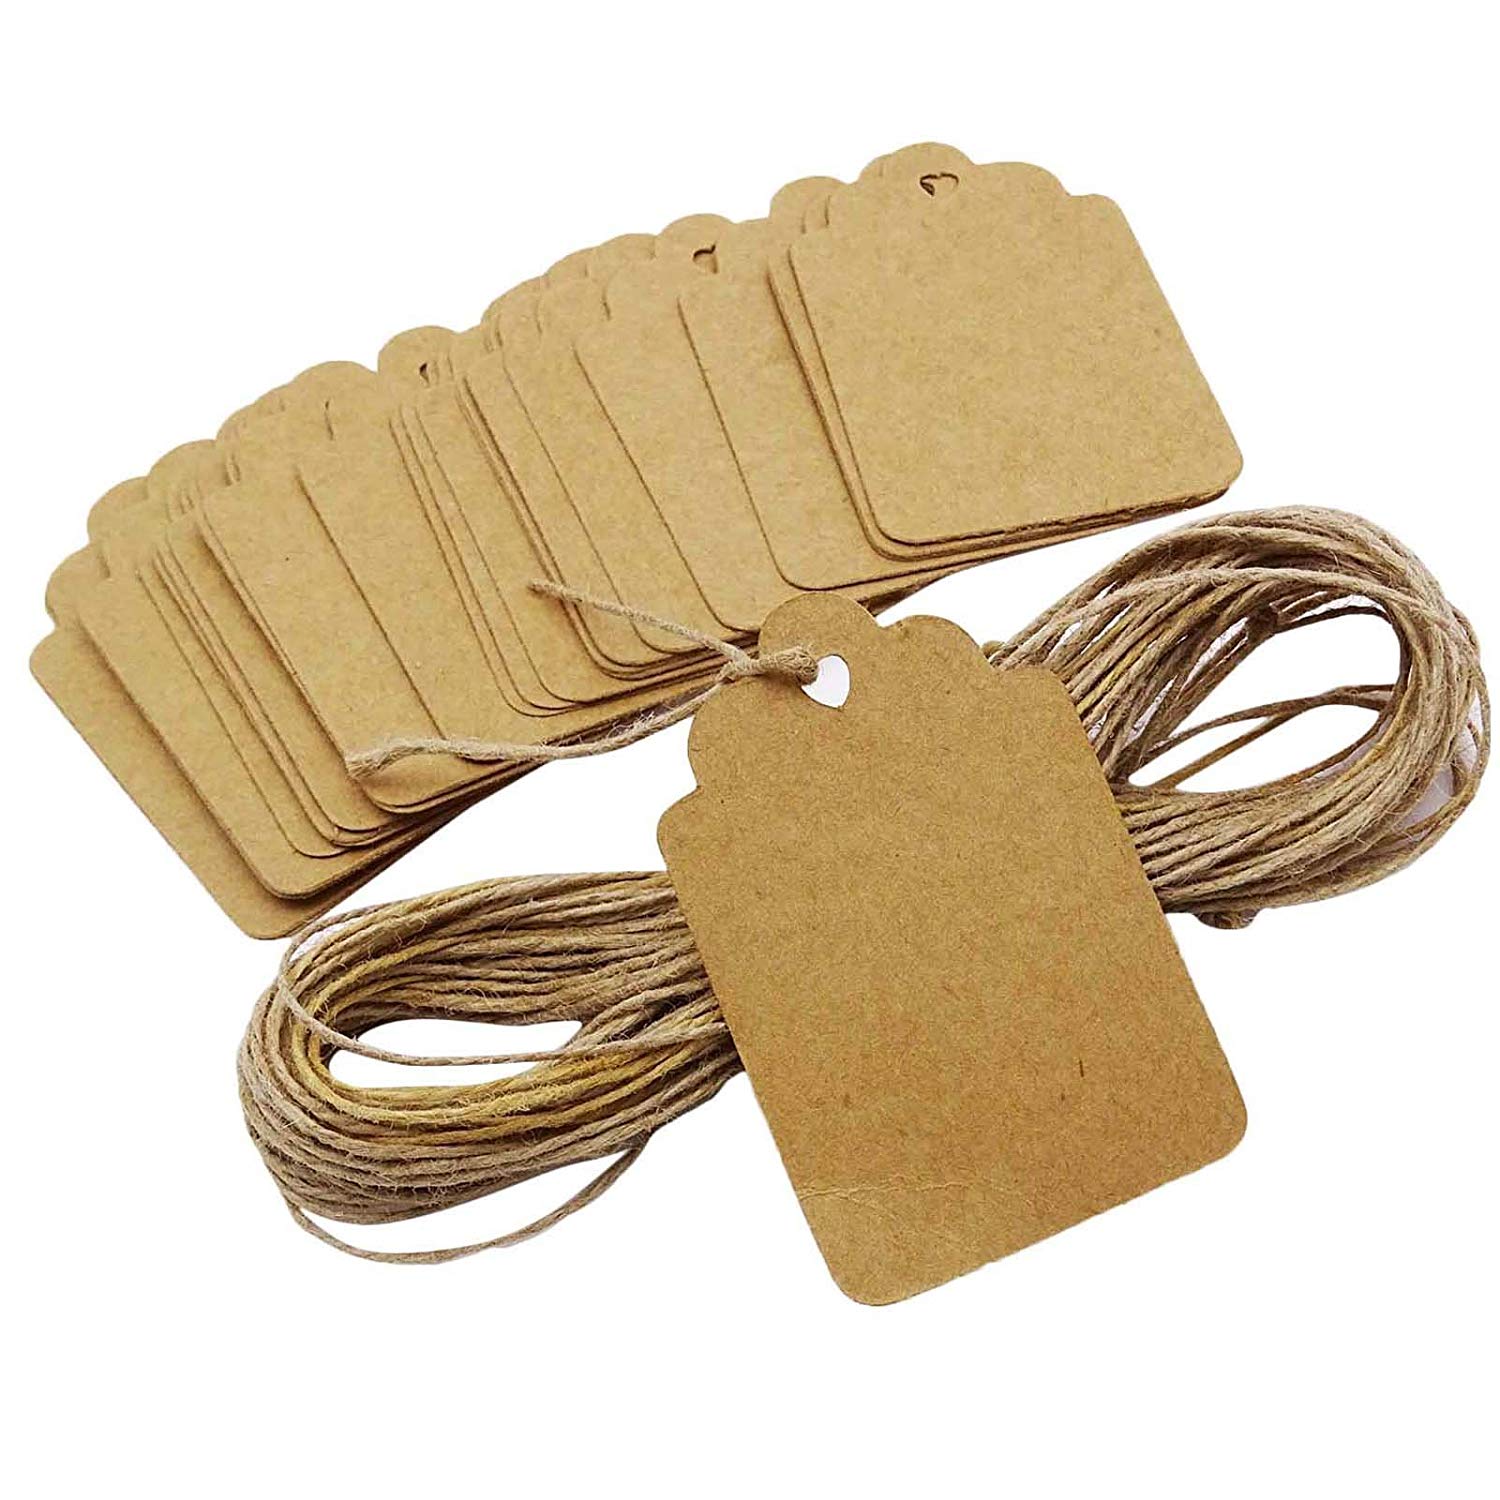 Details about   100x Rustic Rectangle Kraft Paper Bonbonniere Wedding Gift/Paper Tags Brown 